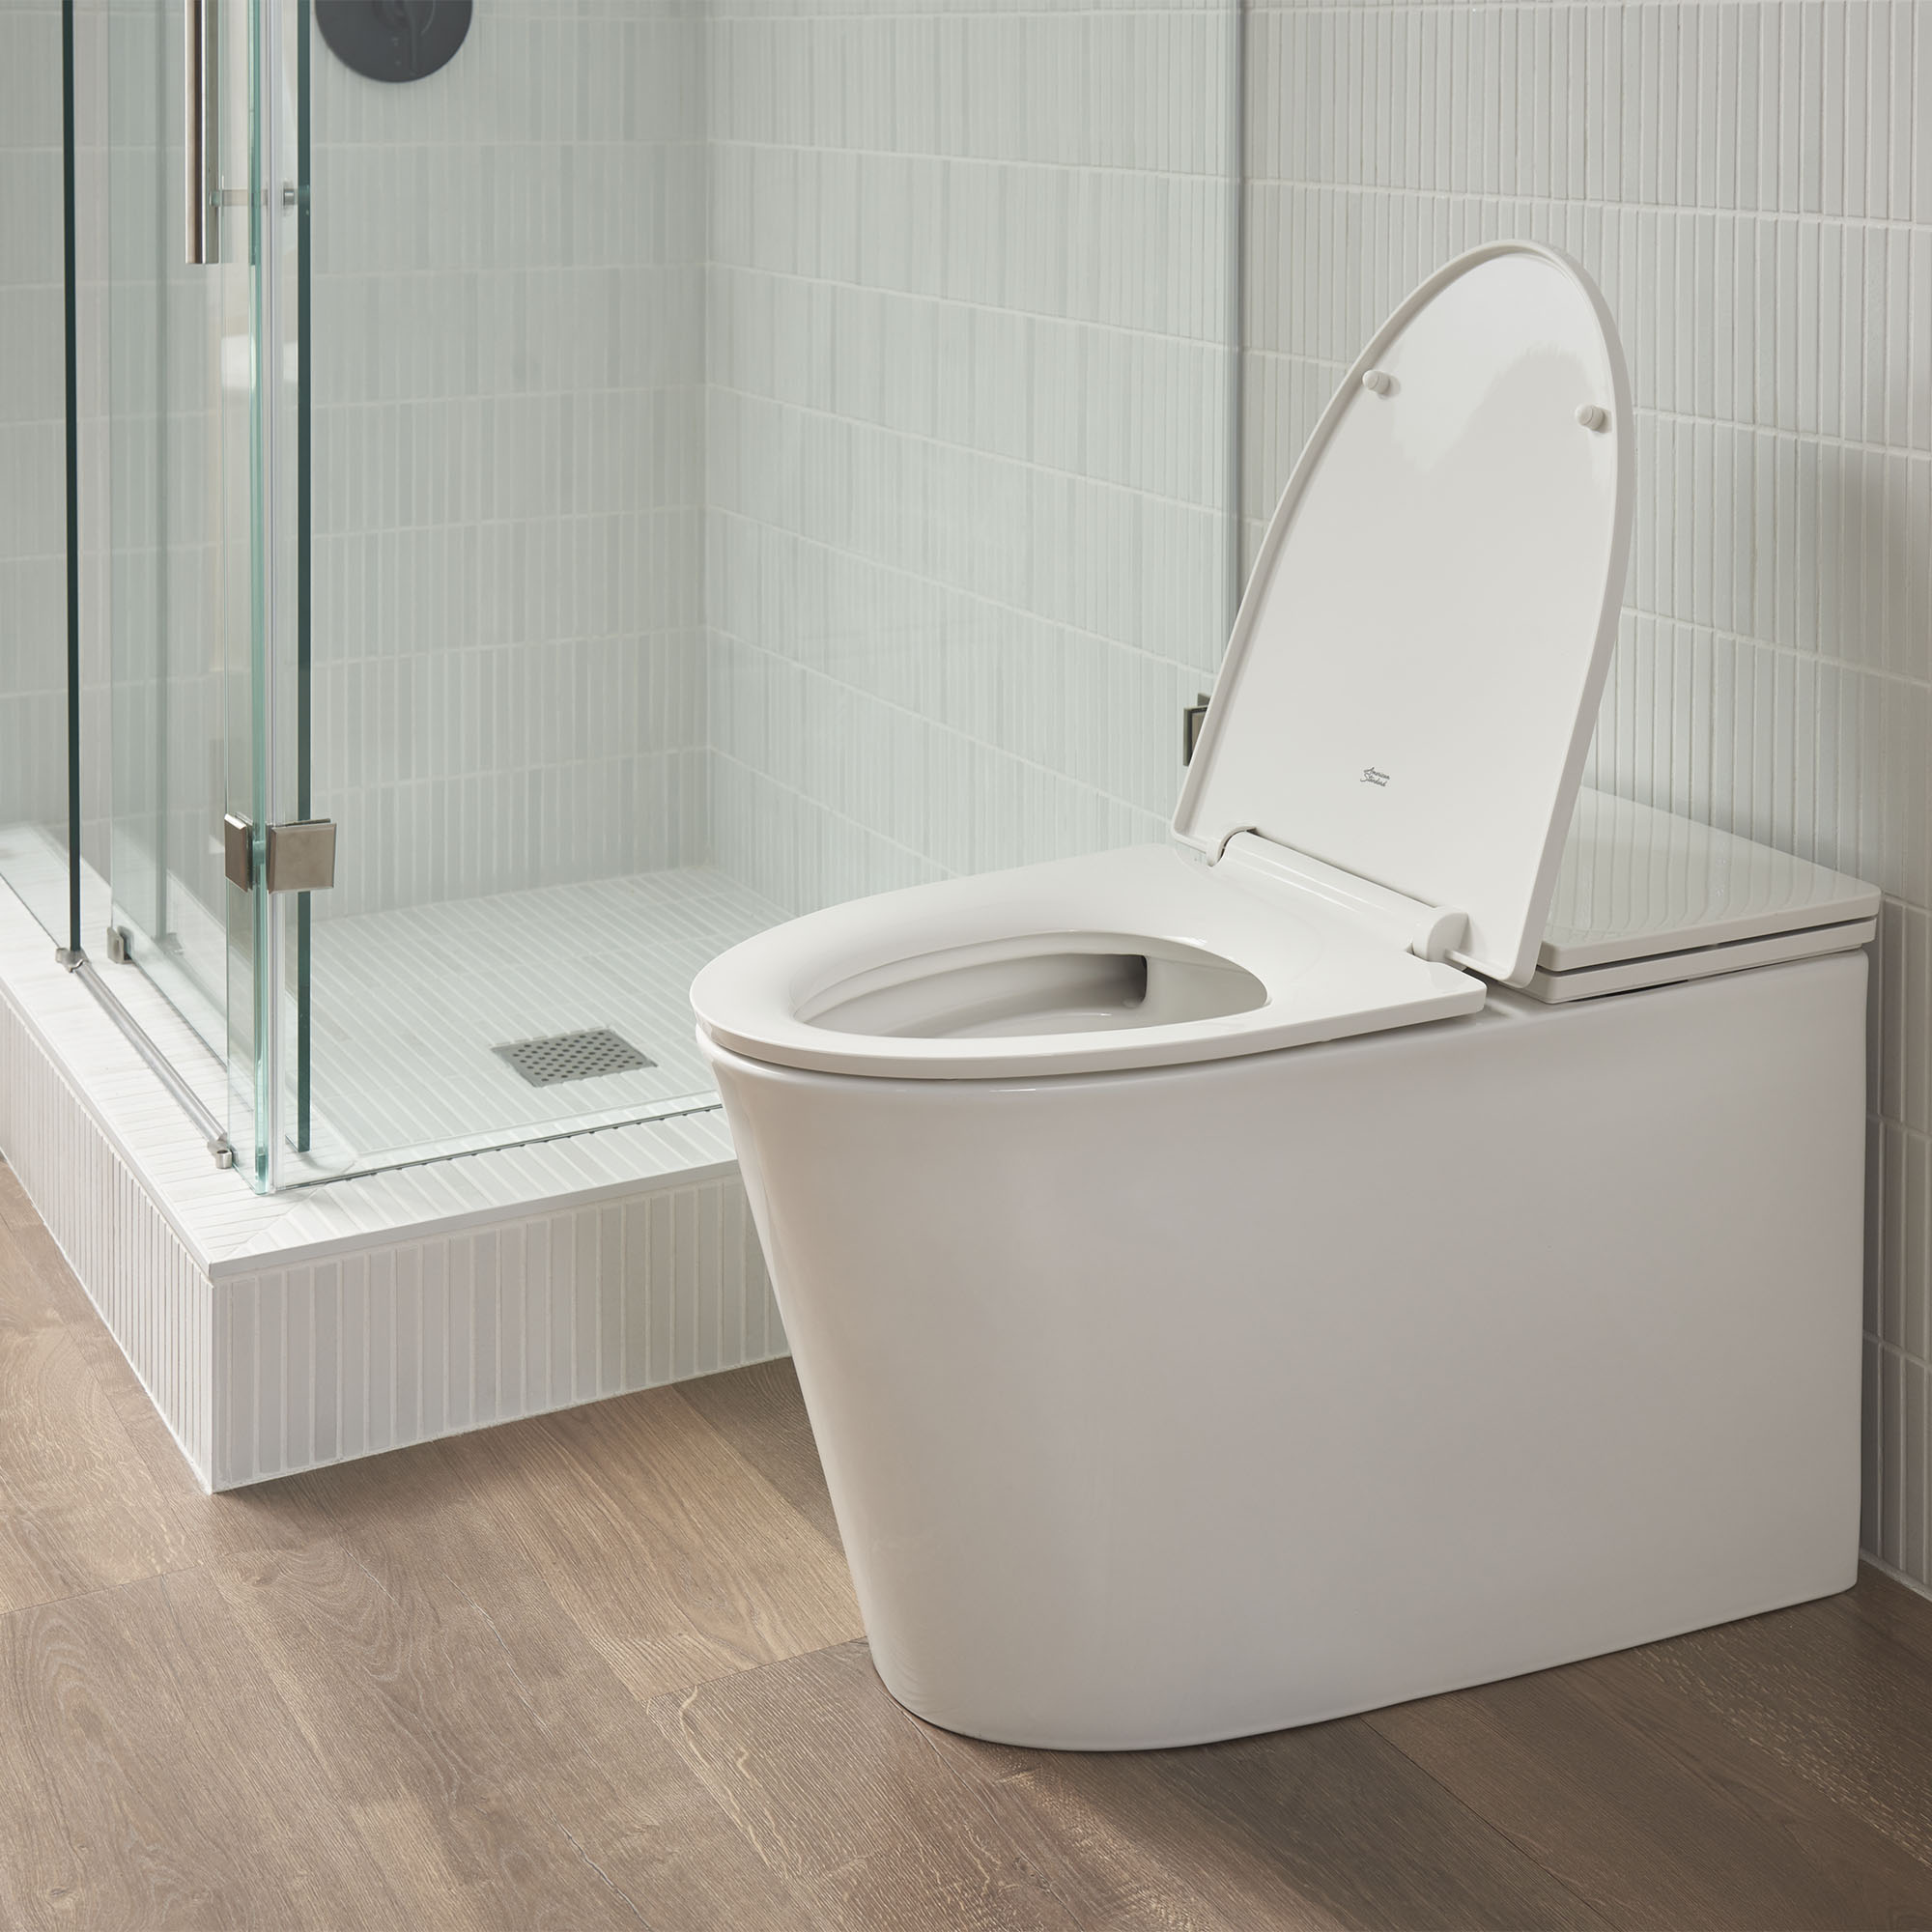 American Standard Studio S 1-piece 1.0 GPF White Elongated Low-Profile Toilet, Seat Included - image 10 of 14